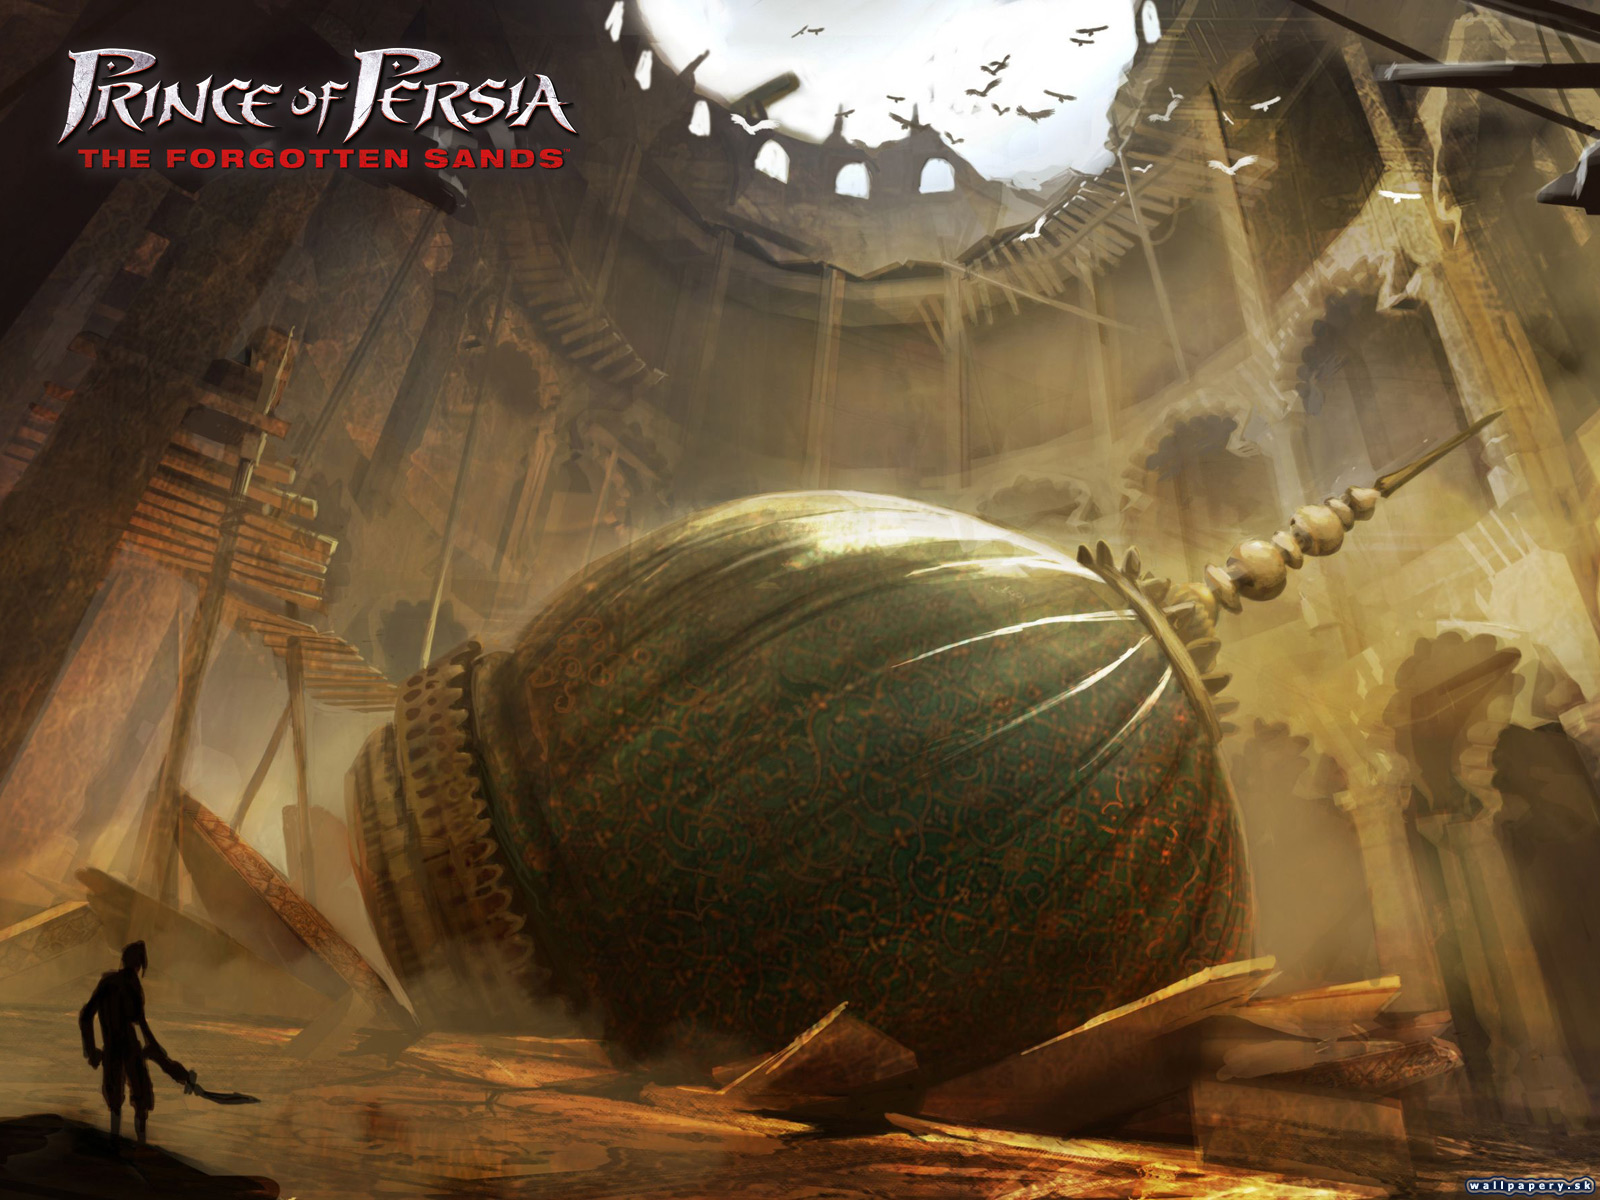 Prince of Persia: The Forgotten Sands - wallpaper 6